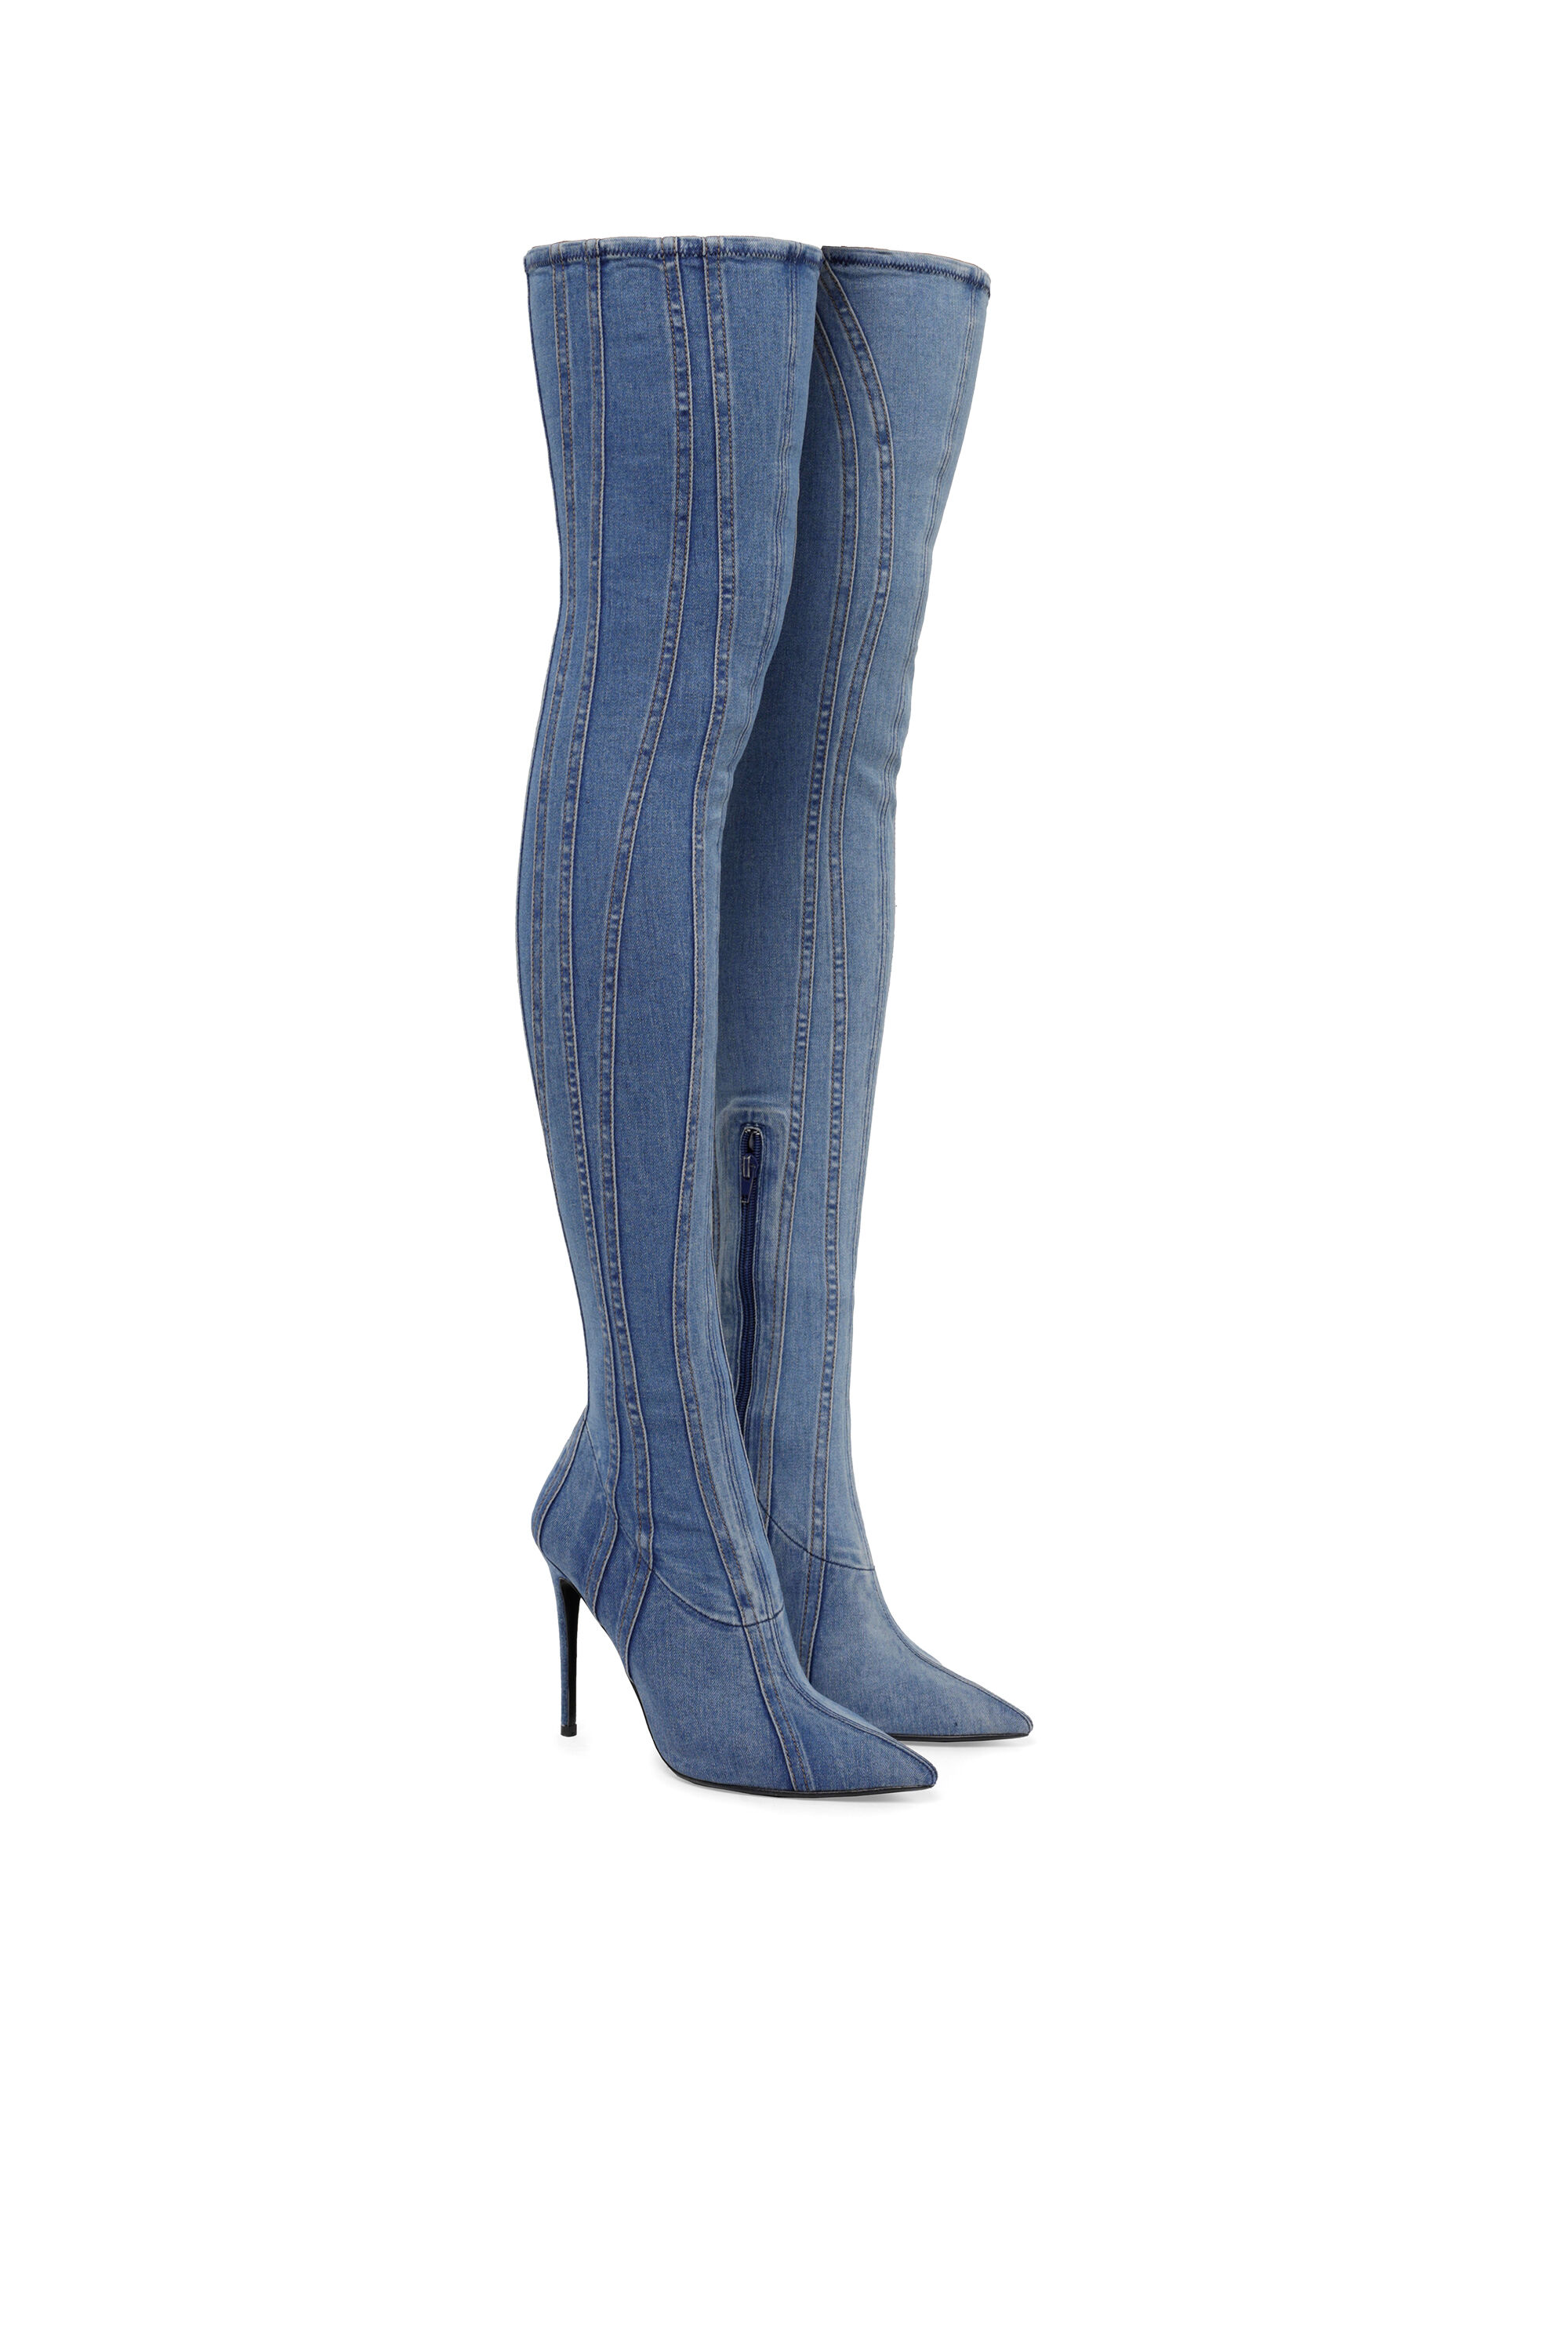 Diesel - D-YUCCA OTK, Woman D-Yucca Otk - Over-the-knee boots in denim in Blue - Image 2